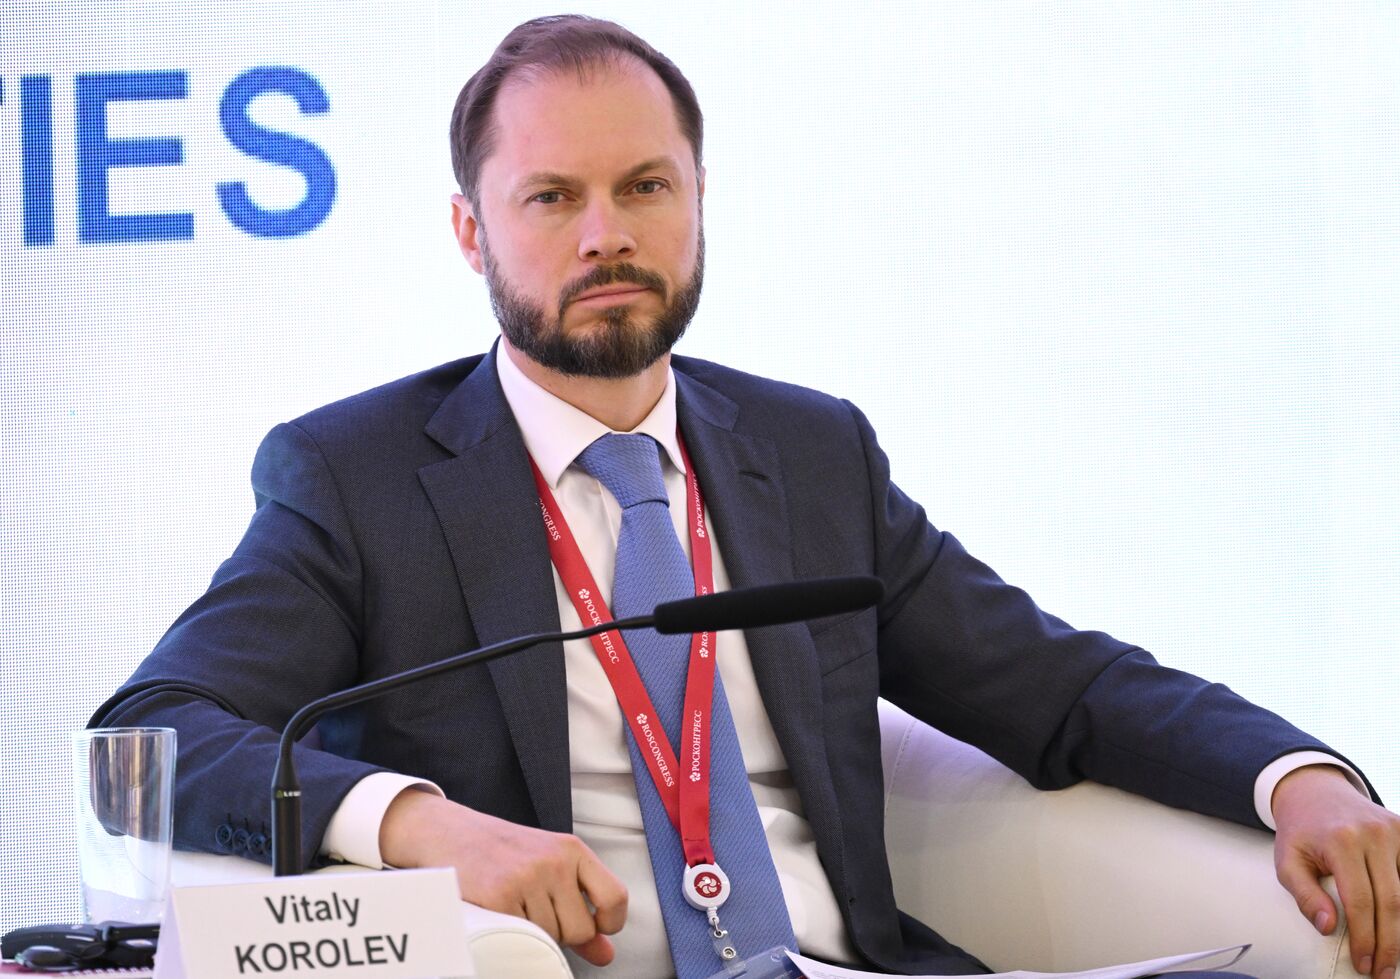 SPIEF-2023. Technological Sovereignty in Agribusiness: Challenges and Opportunities